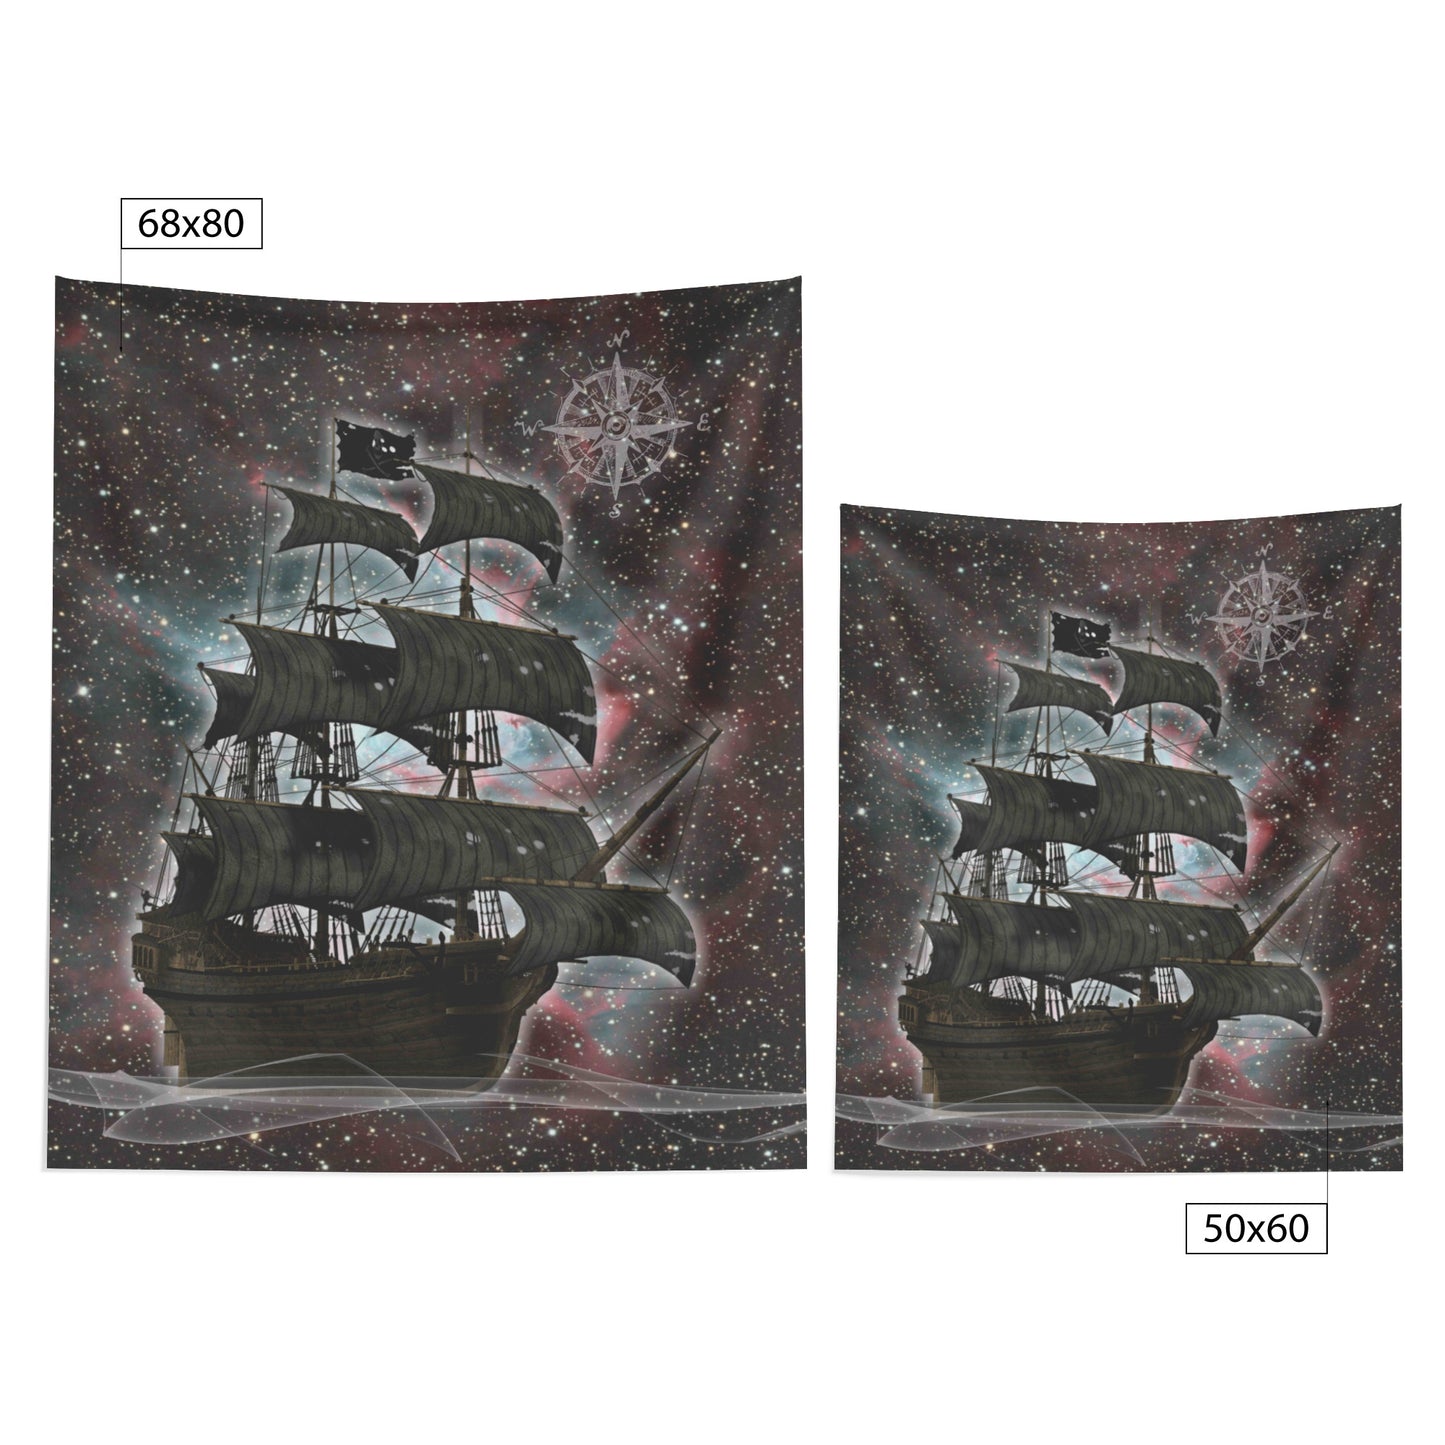 Pirate Ghost Ship Wall Hanging - Green-Red